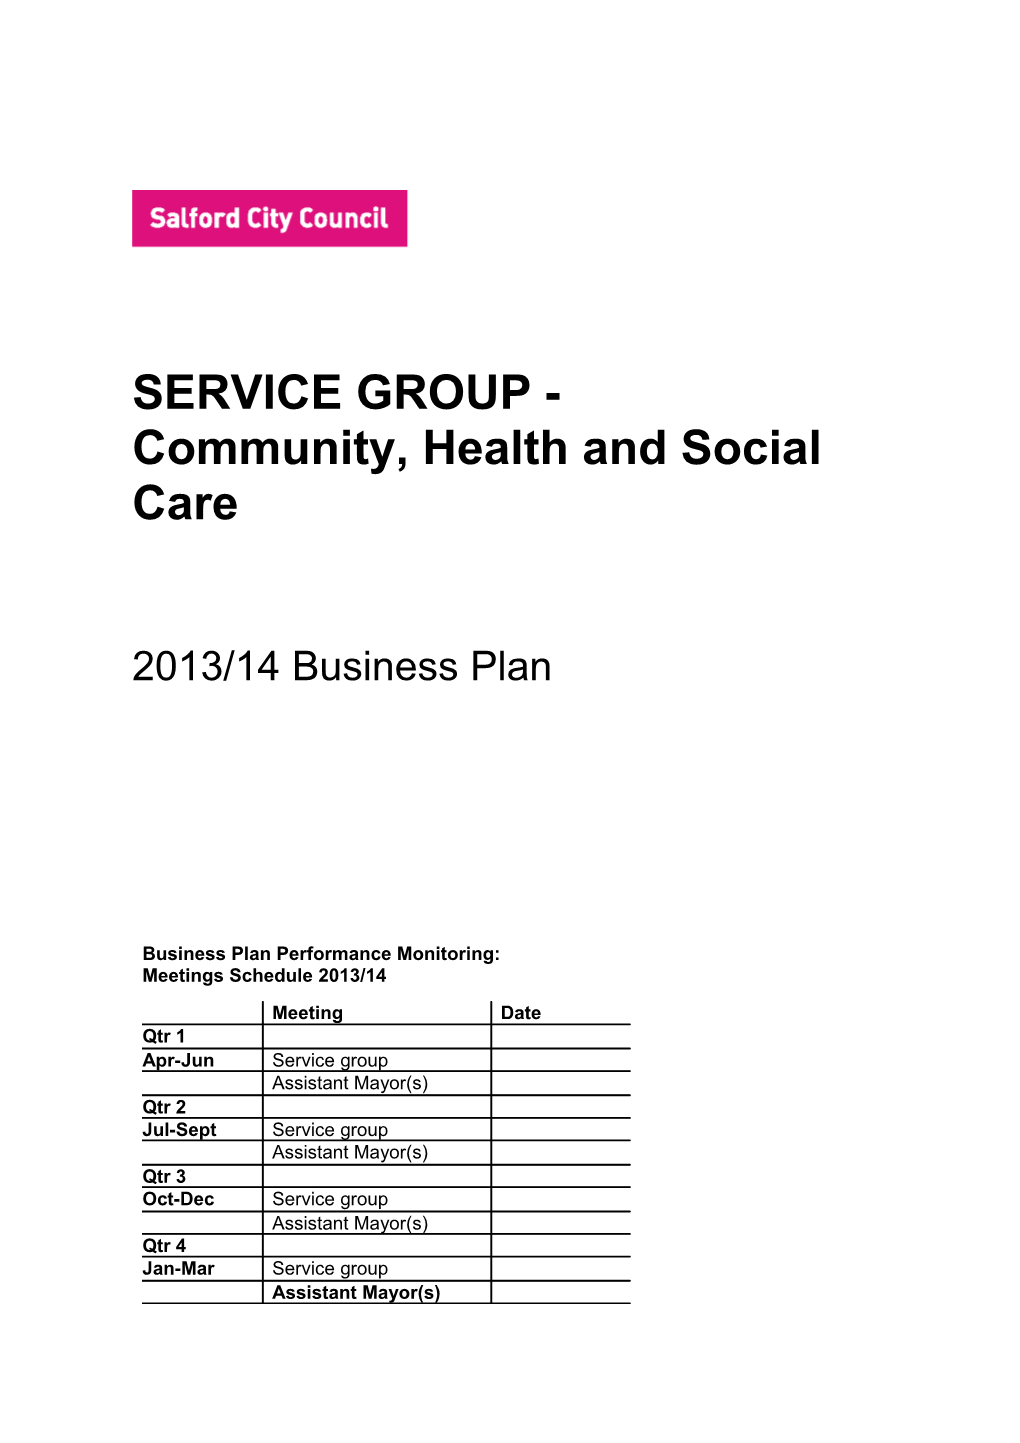 Community, Health and Social Care